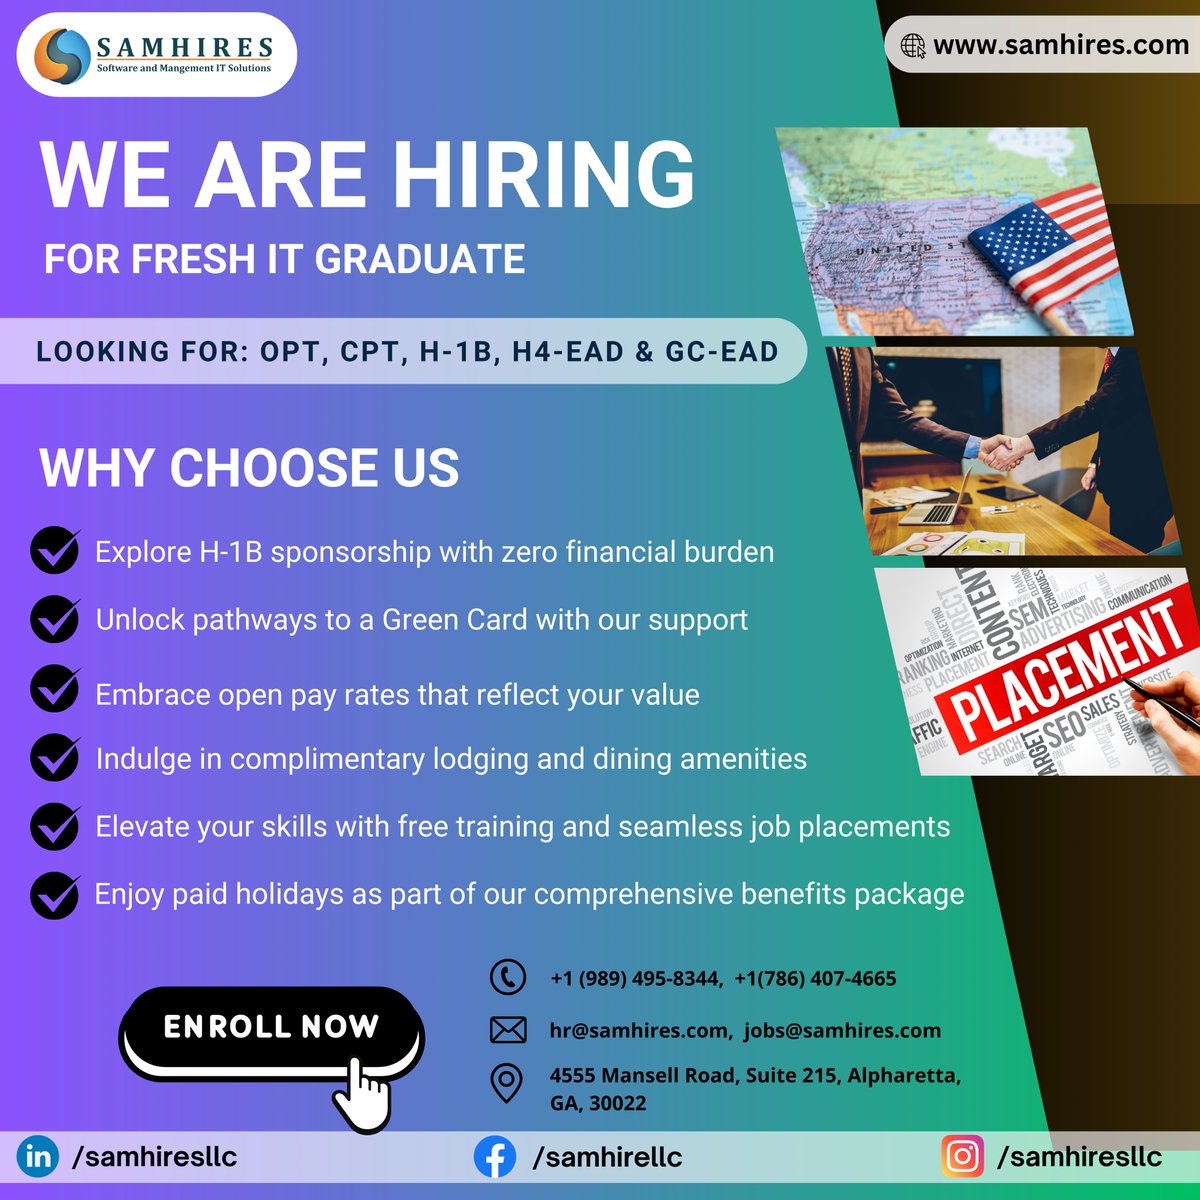 Join 𝐒𝐚𝐦𝐡𝐢𝐫𝐞𝐬 𝐋𝐋𝐂 and Launch Your IT Career!

#SamhiresLLC #ITCareer #FreshGraduates #CPT #OPT #H1BSponsorship #GreenCard #OpenPayRates #FreeTraining #JobPlacements #PaidHolidays #StaffingFirm #Recruitment #CareerOpportunities #AlpharettaGA